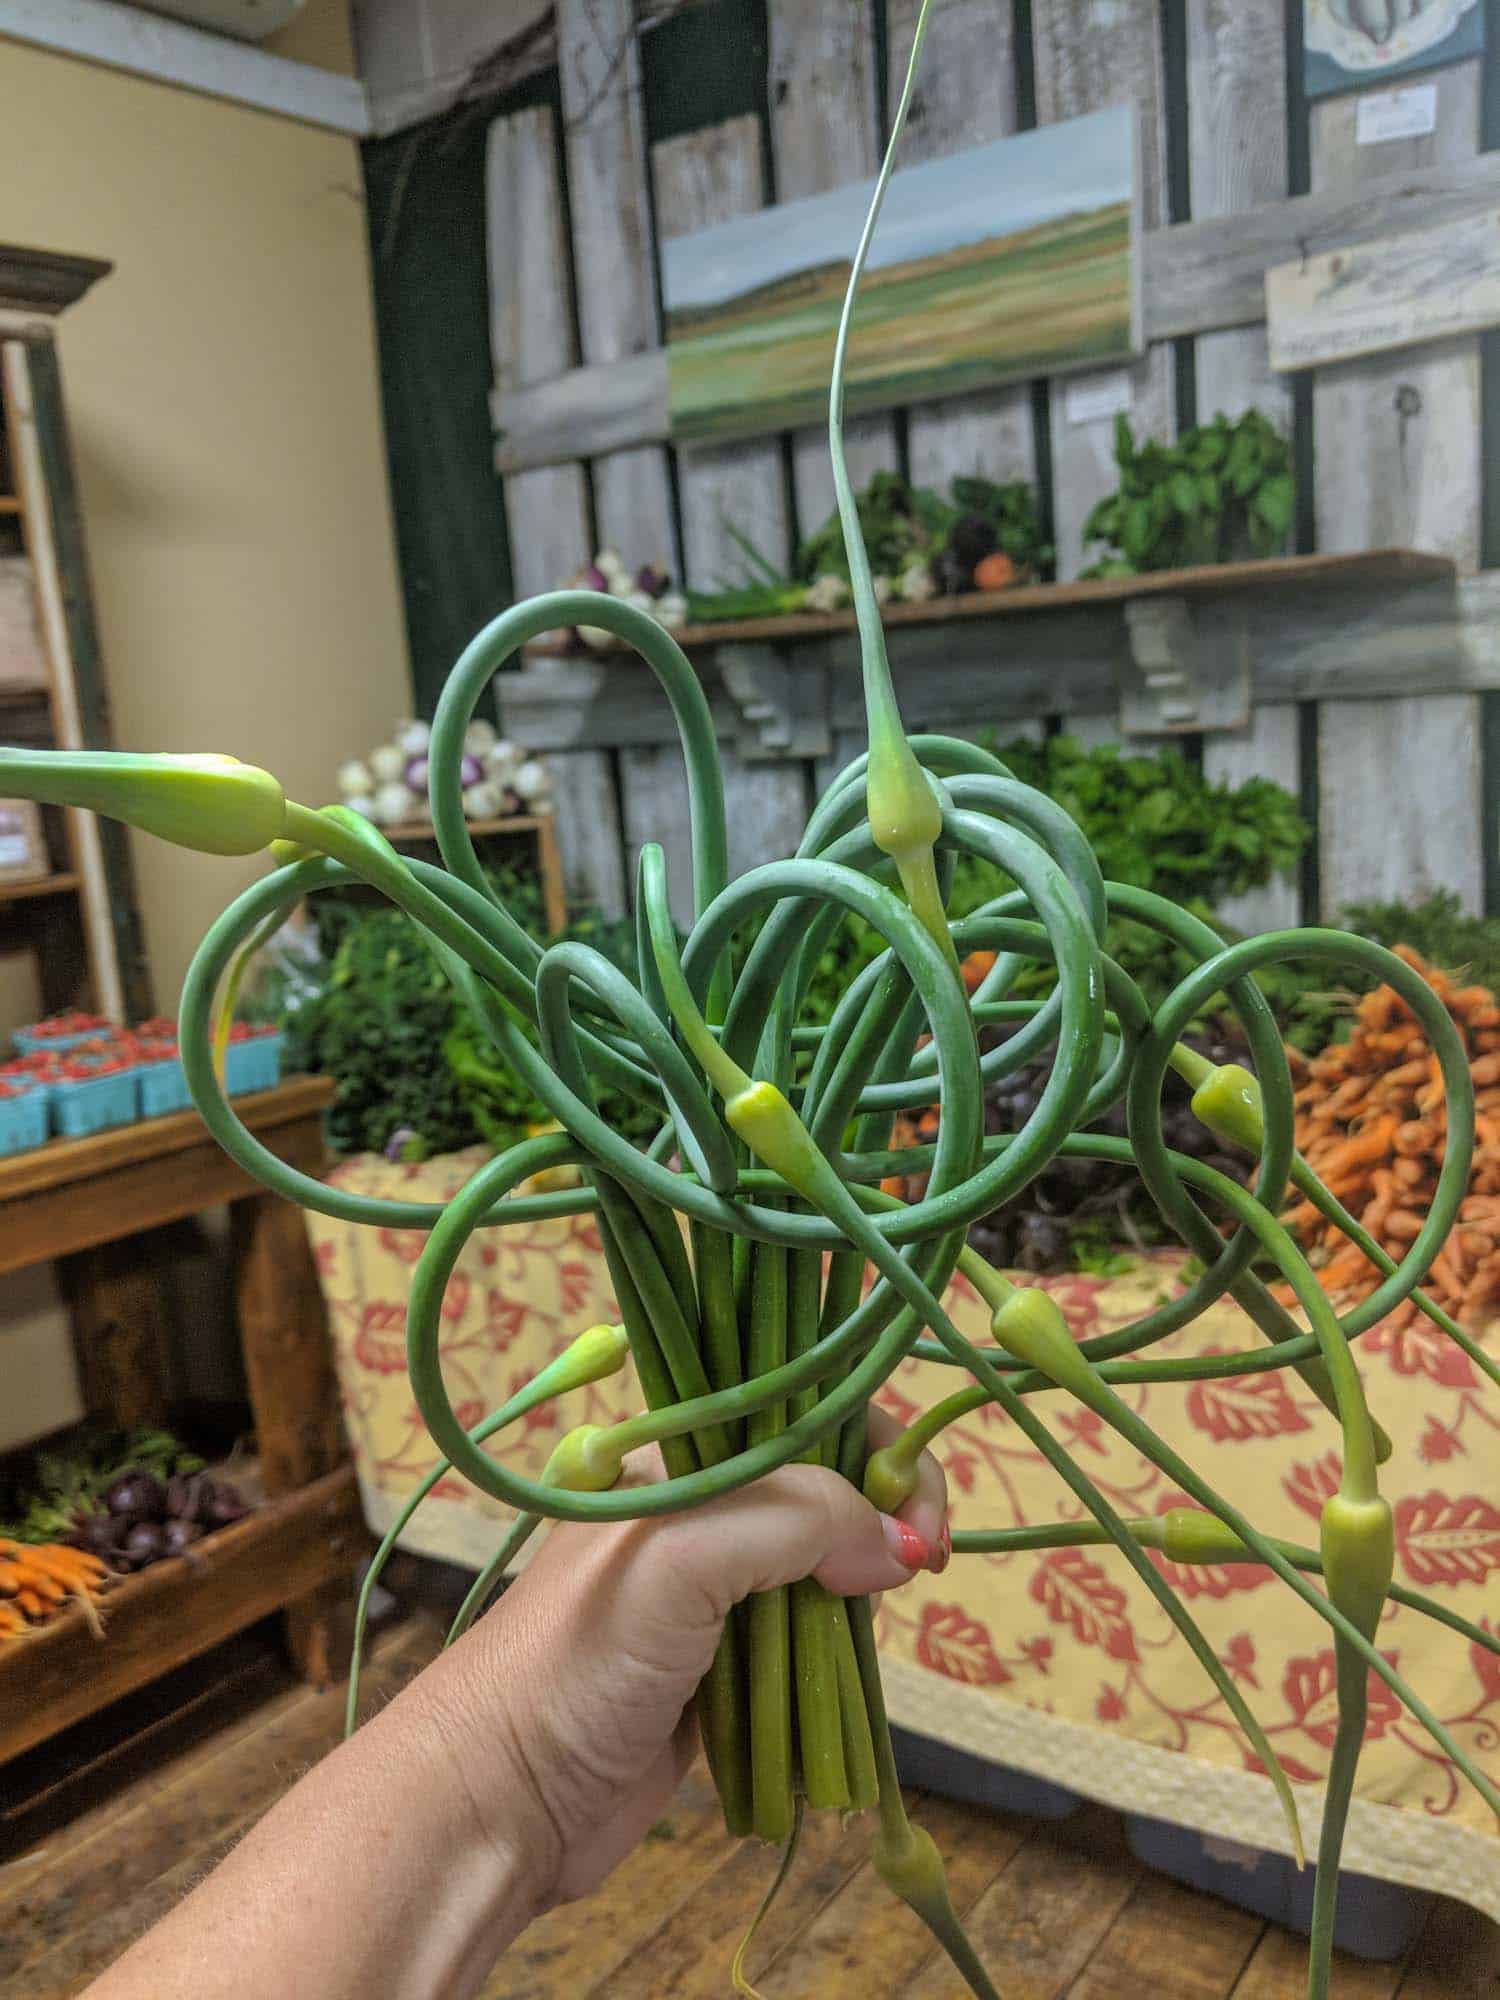 Garlic scapes in a woman's hand at Wolfville Farmer's Market